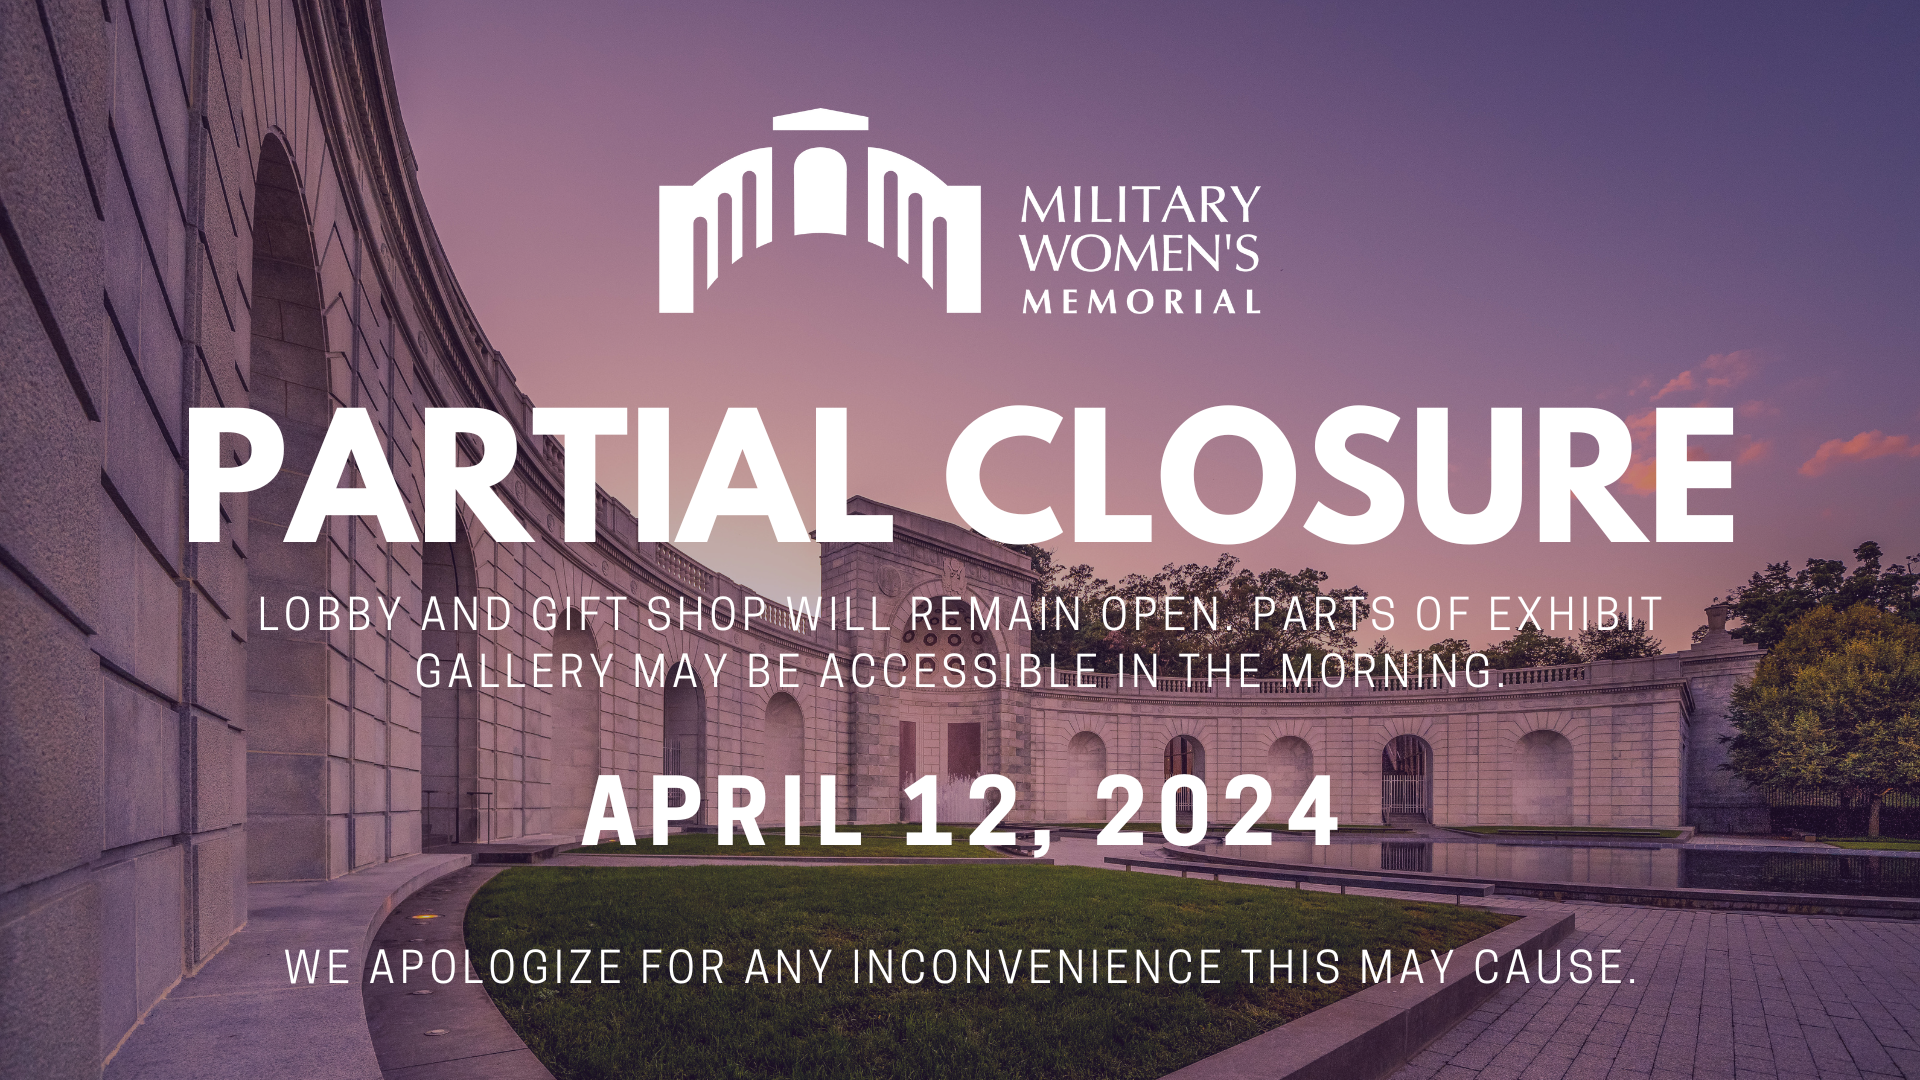 Partial Closure of Military Women's Memorial on April 12, 2024. Lobby and Gift Shop will remain open. Parts of gallery may be accessible during the morning.